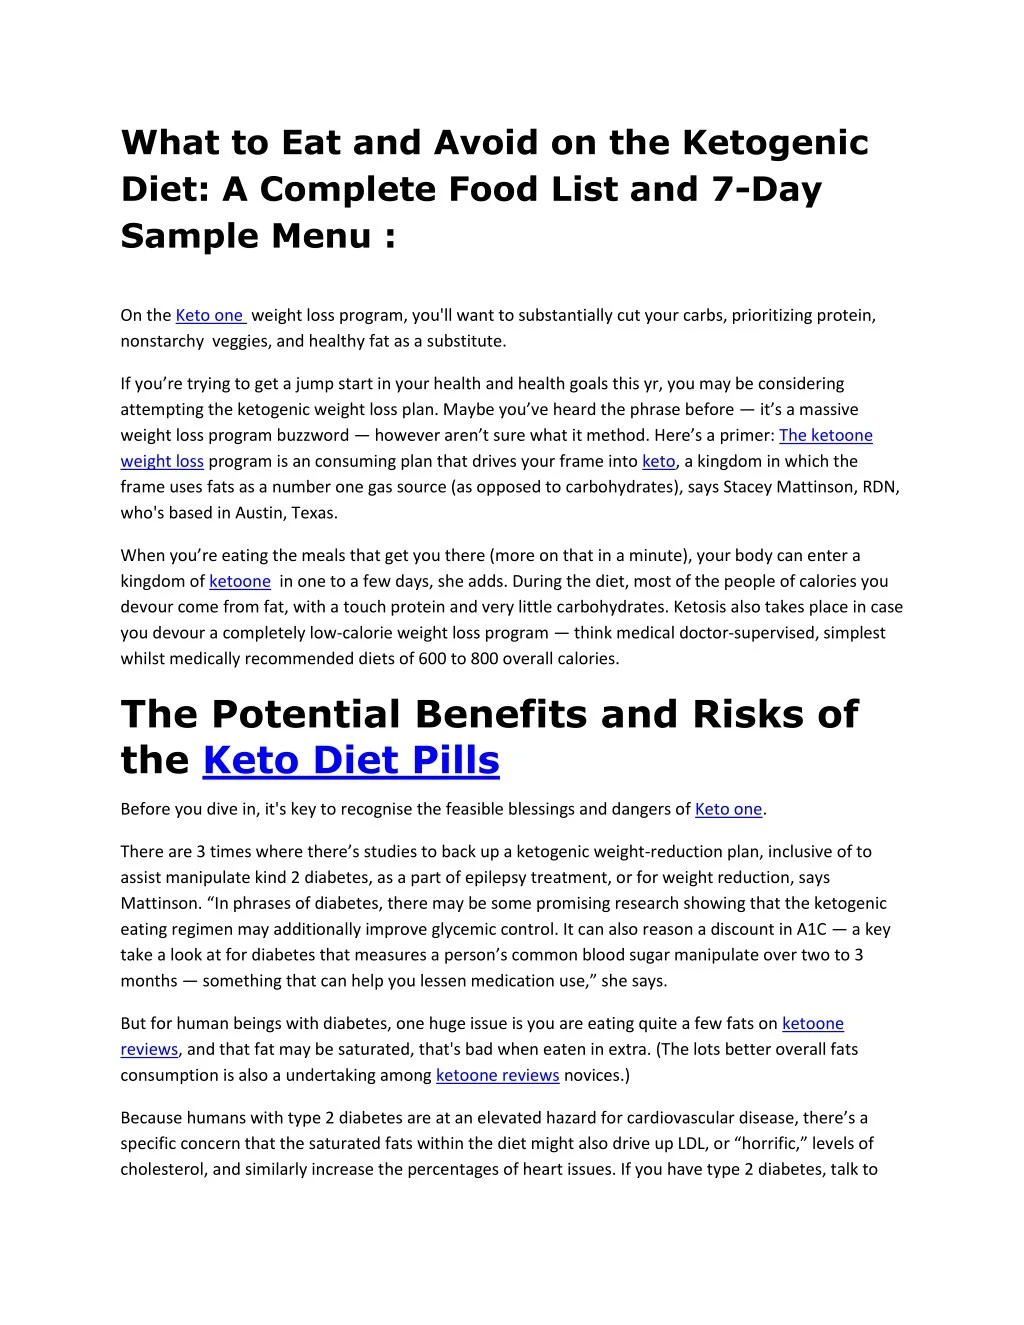 what to eat and avoid on the ketogenic diet